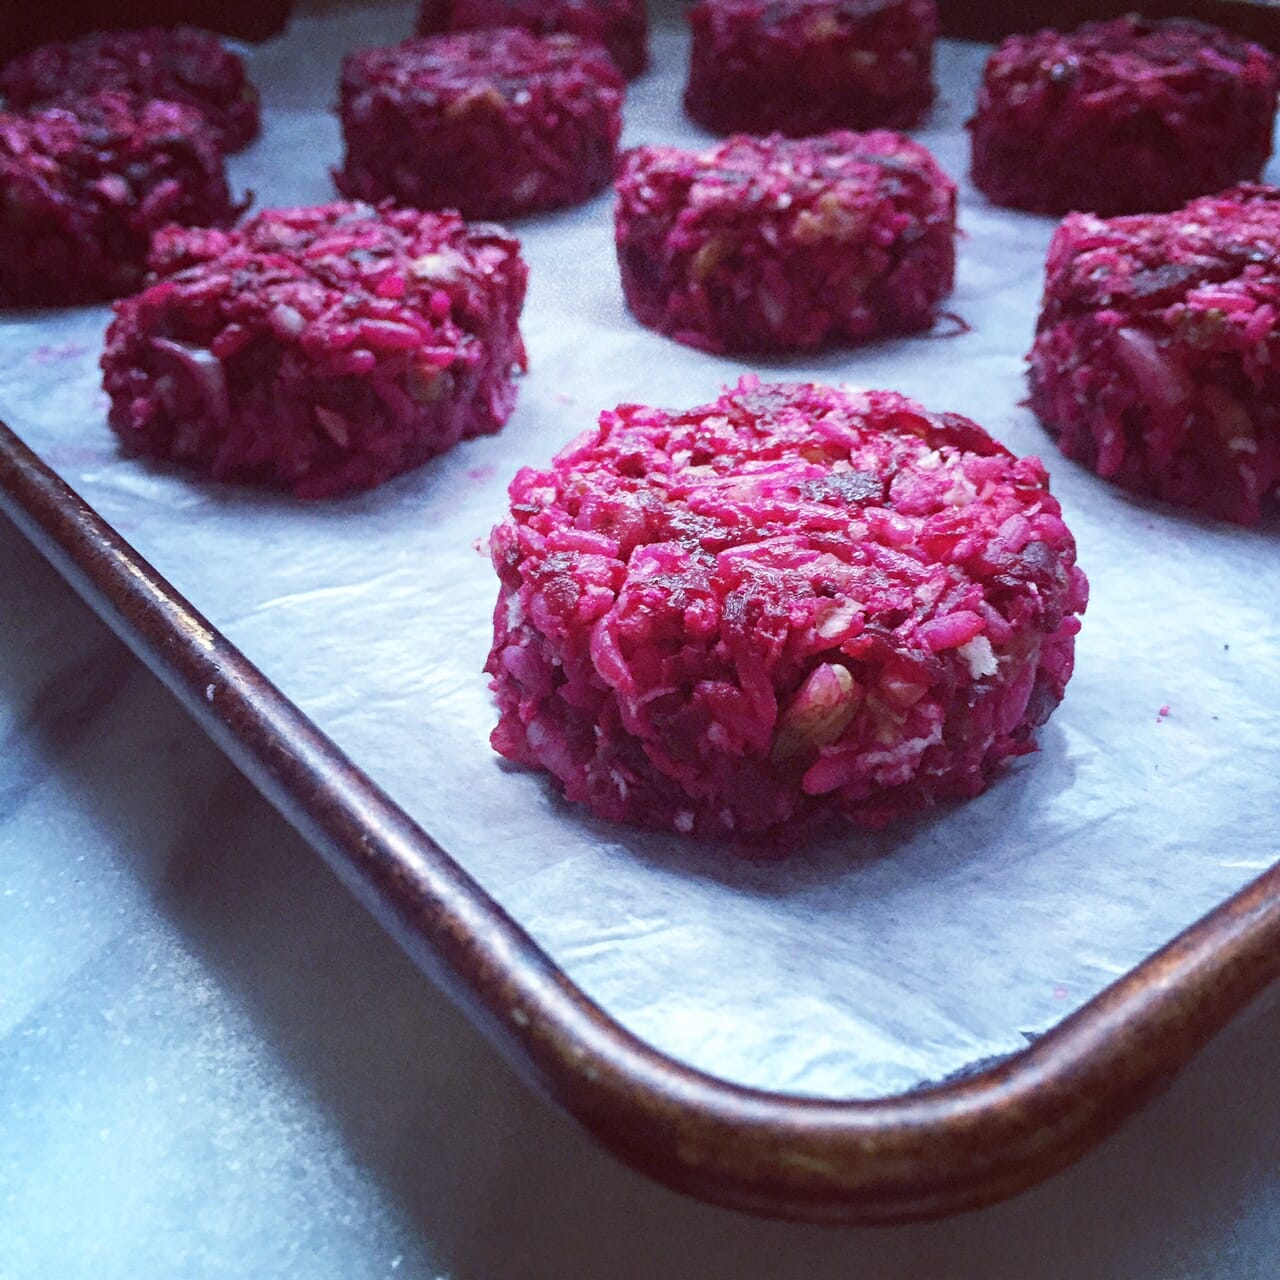 Beet and Brown Rice Burgers